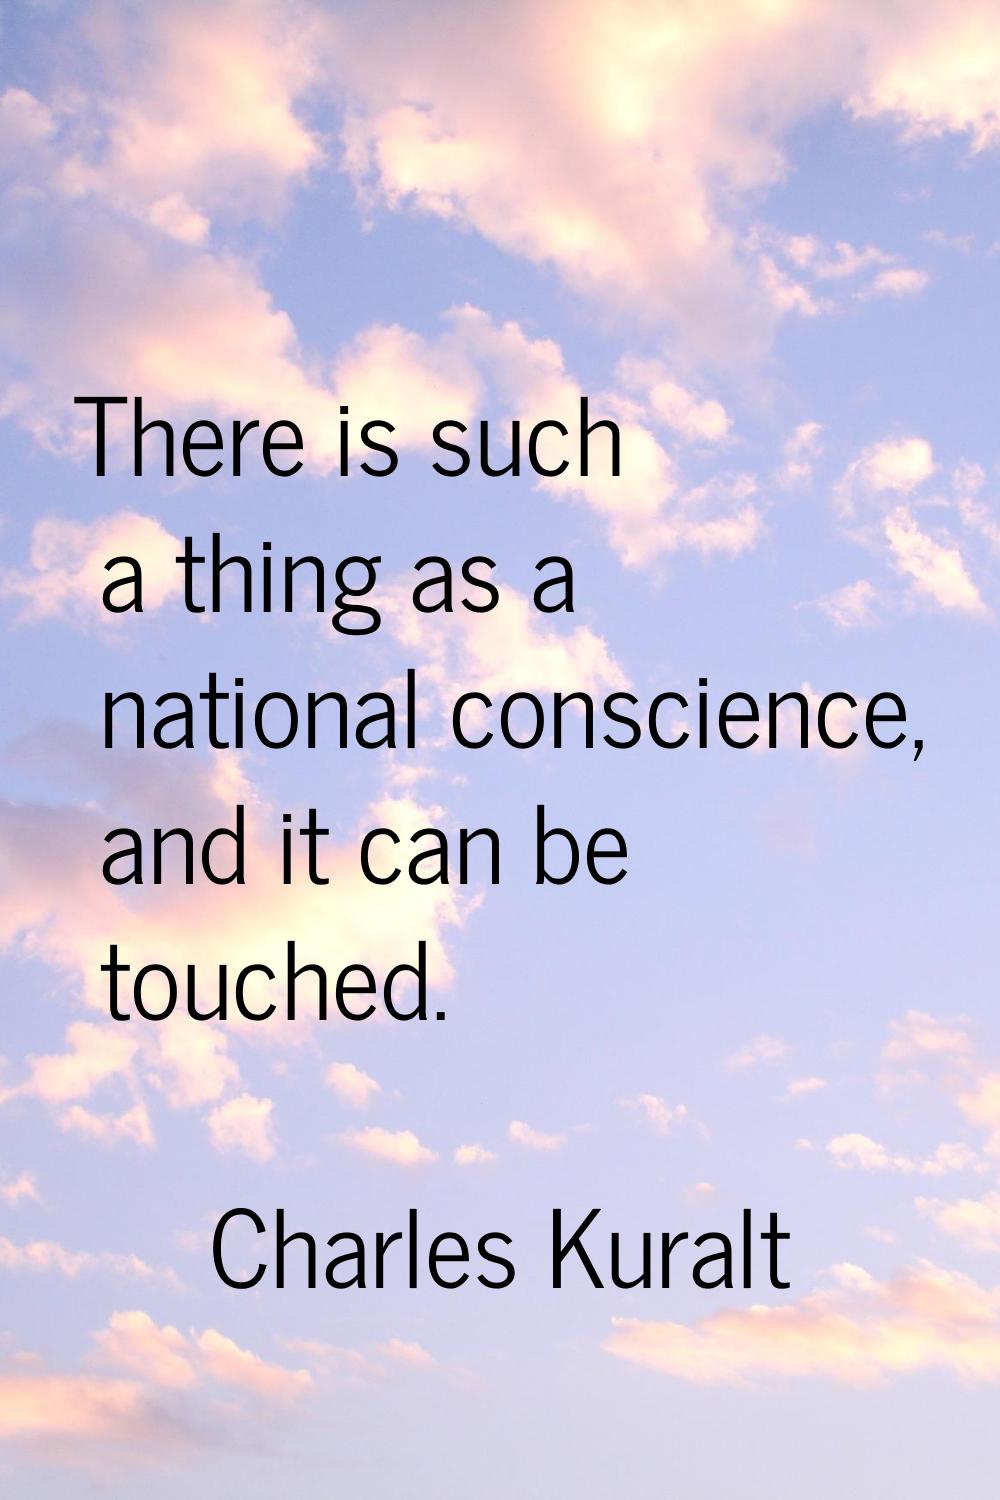 There is such a thing as a national conscience, and it can be touched.